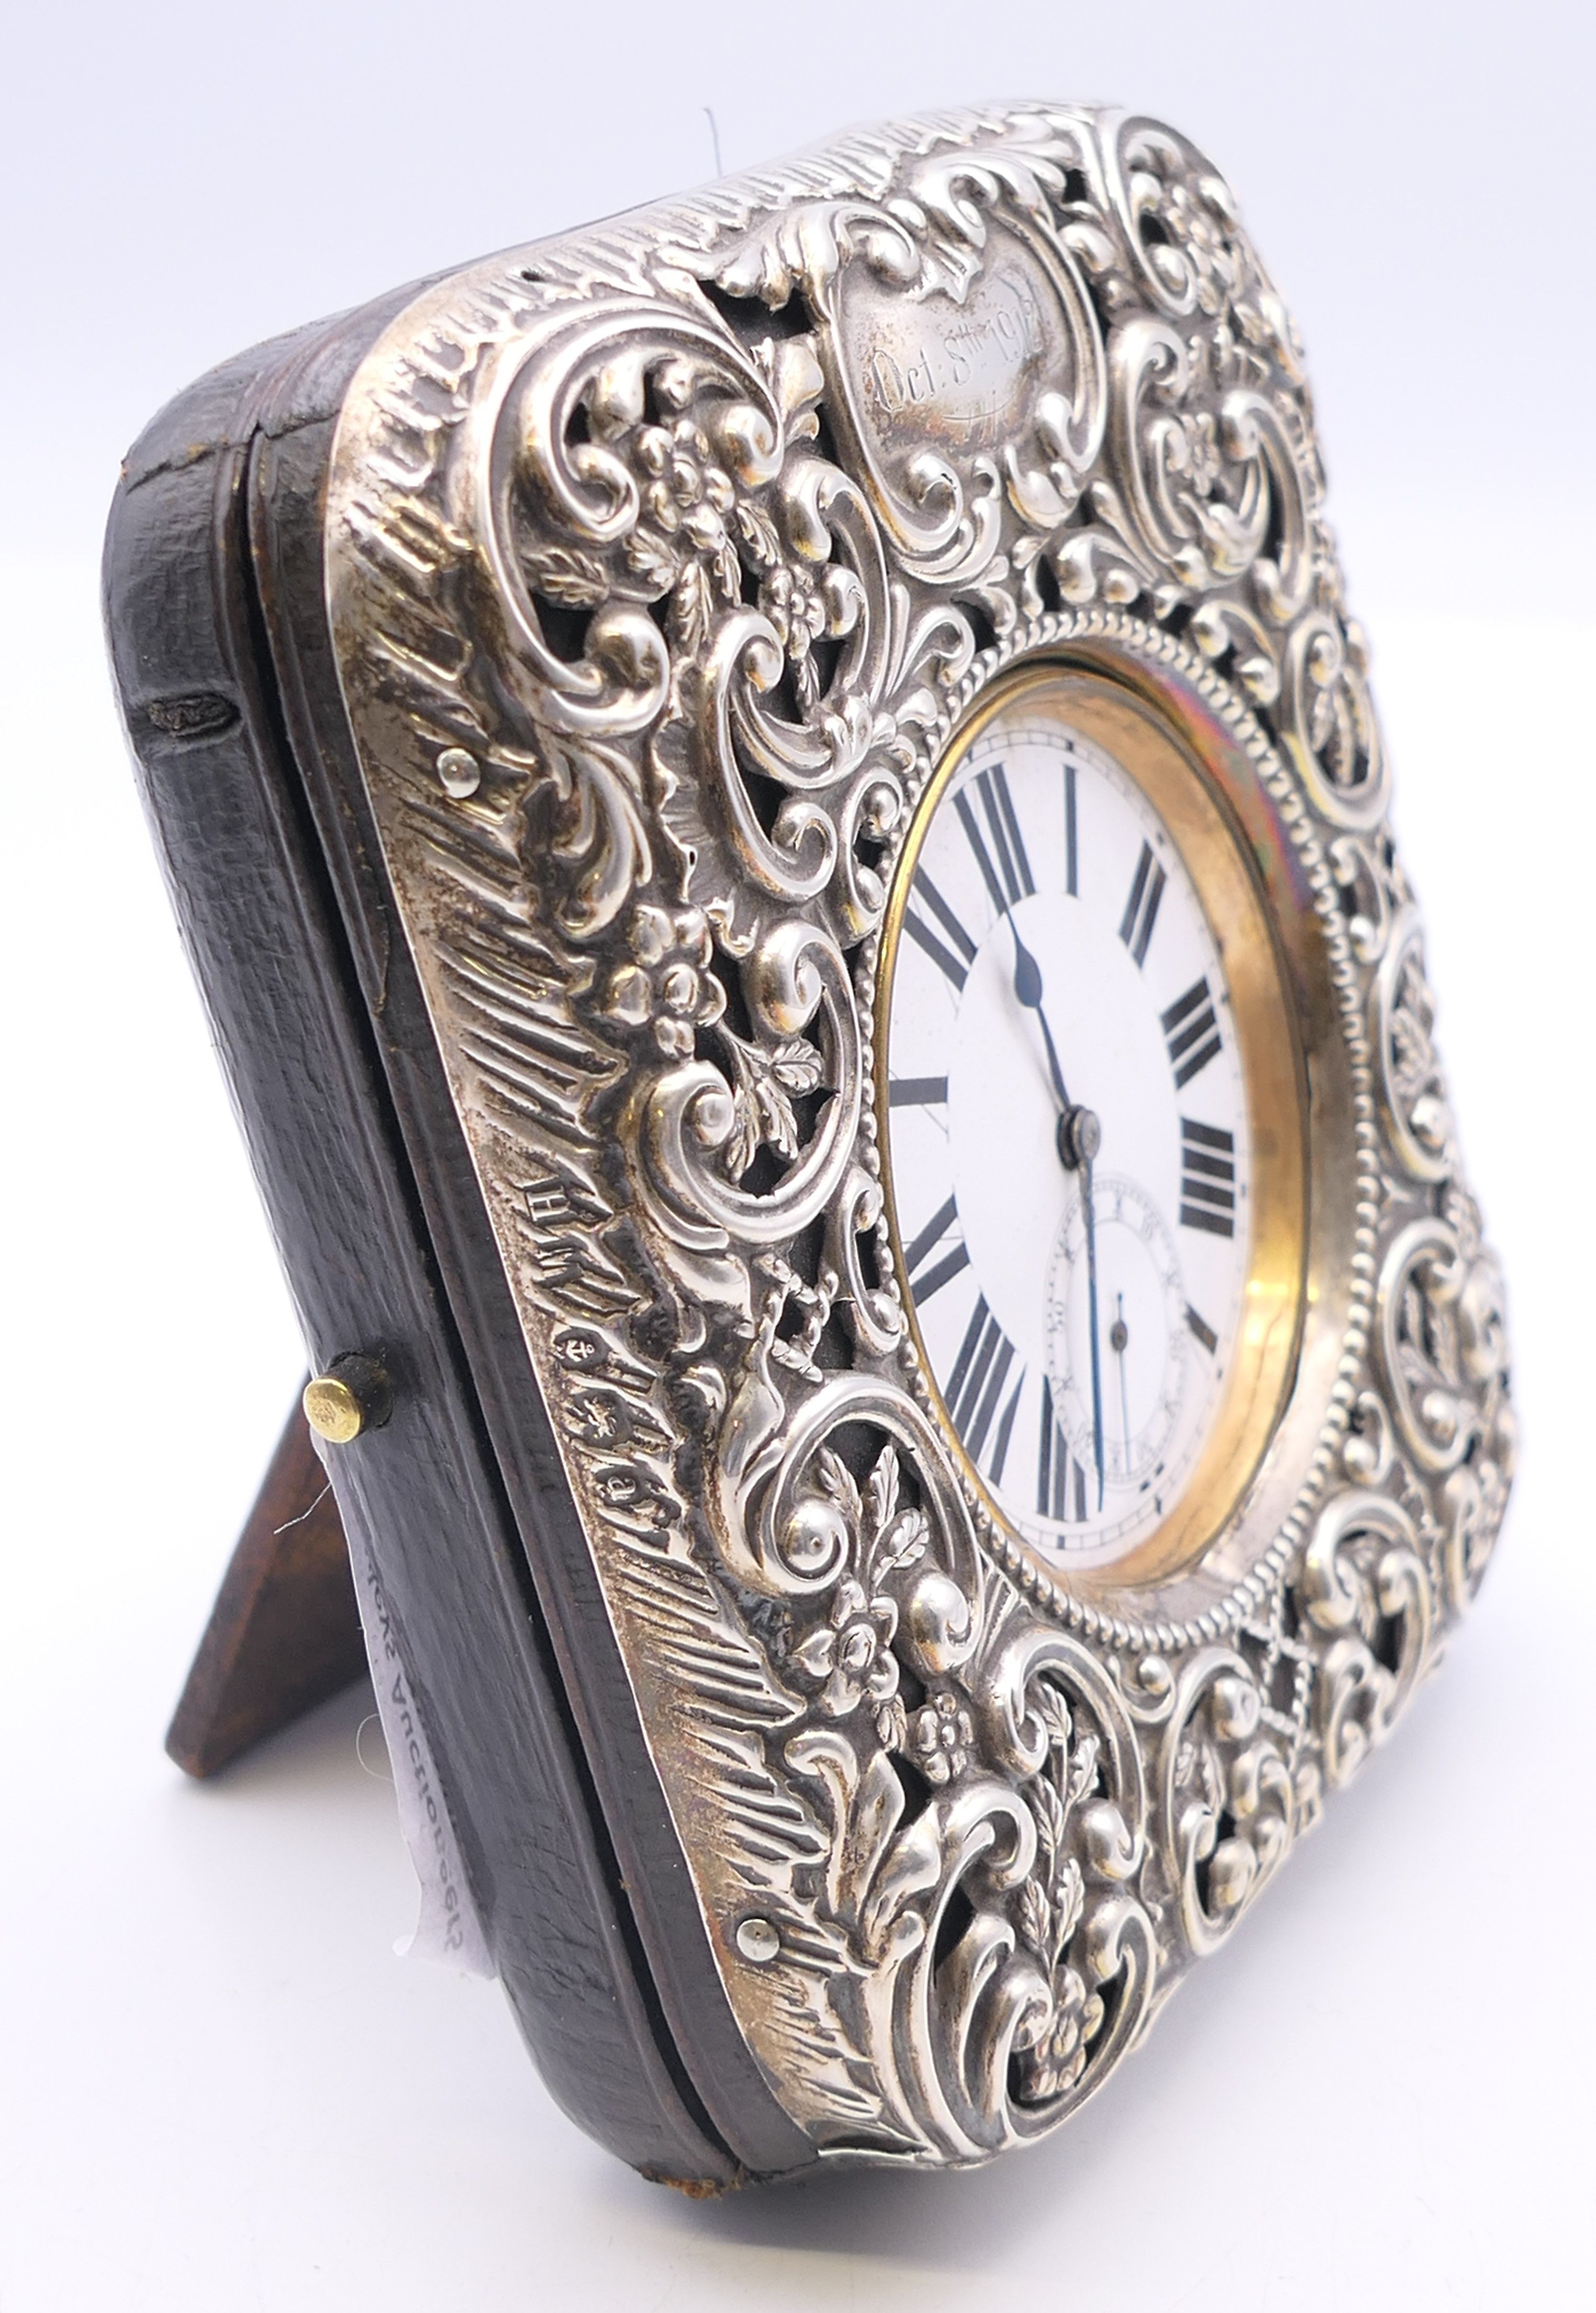 A silver plated Goliath pocket watch housed in a silver mounted case inscribed Oct 8th 1912. - Image 9 of 13